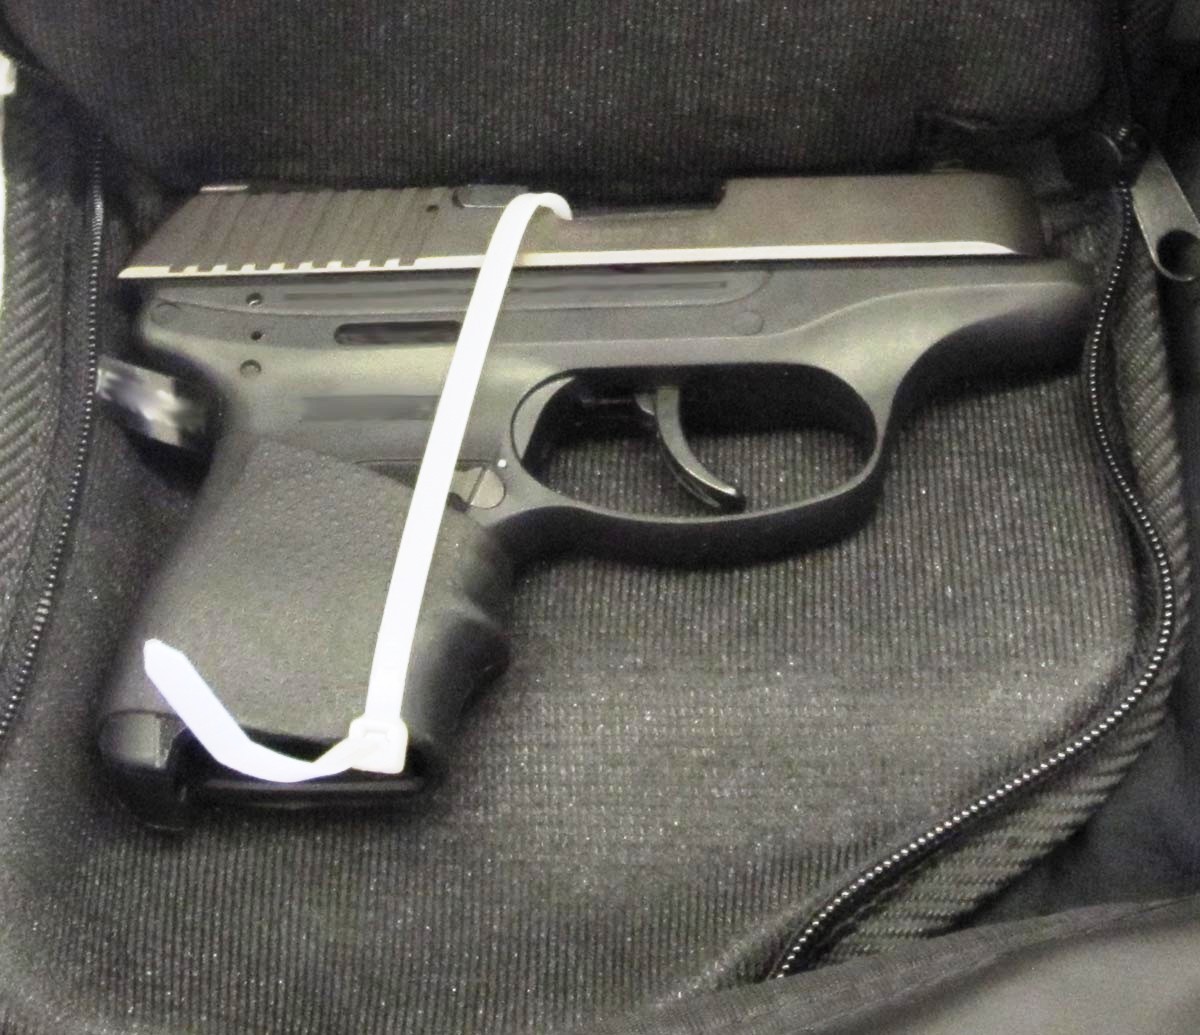 A Grosstephan 9mm, one of the firearms seized by officers at the Coutts border on July 16th, 2014.